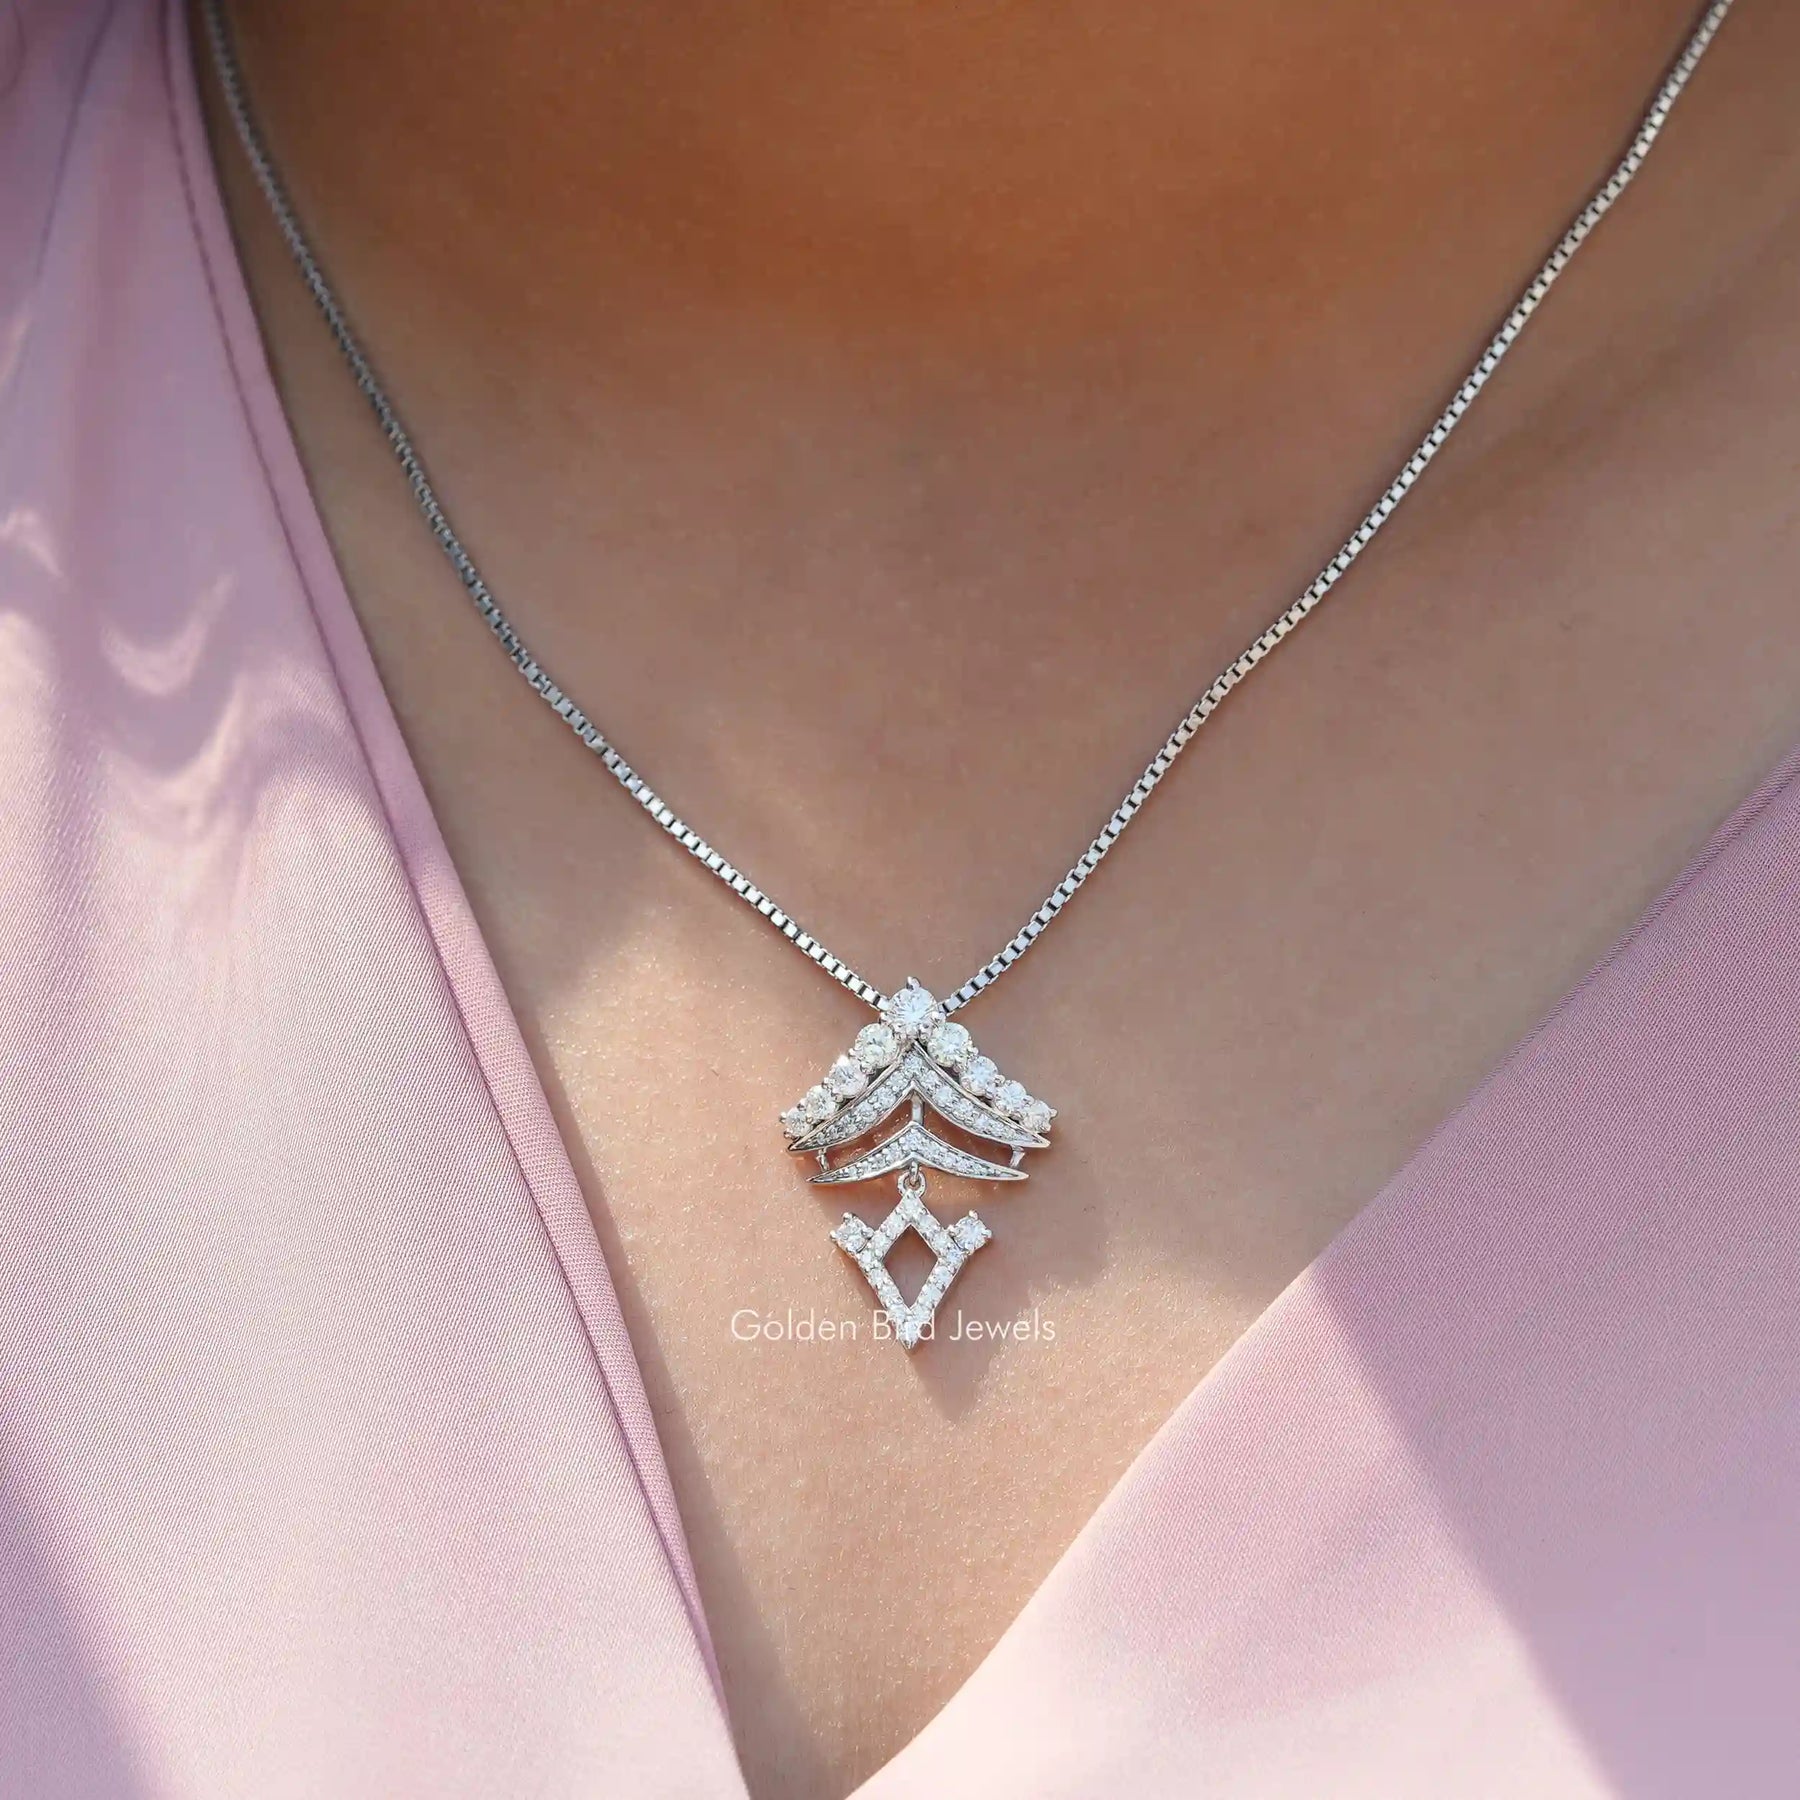 [Round Cut Moissanite Pendant Crafted With 18k White Gold]-[Golden Bird Jewels]